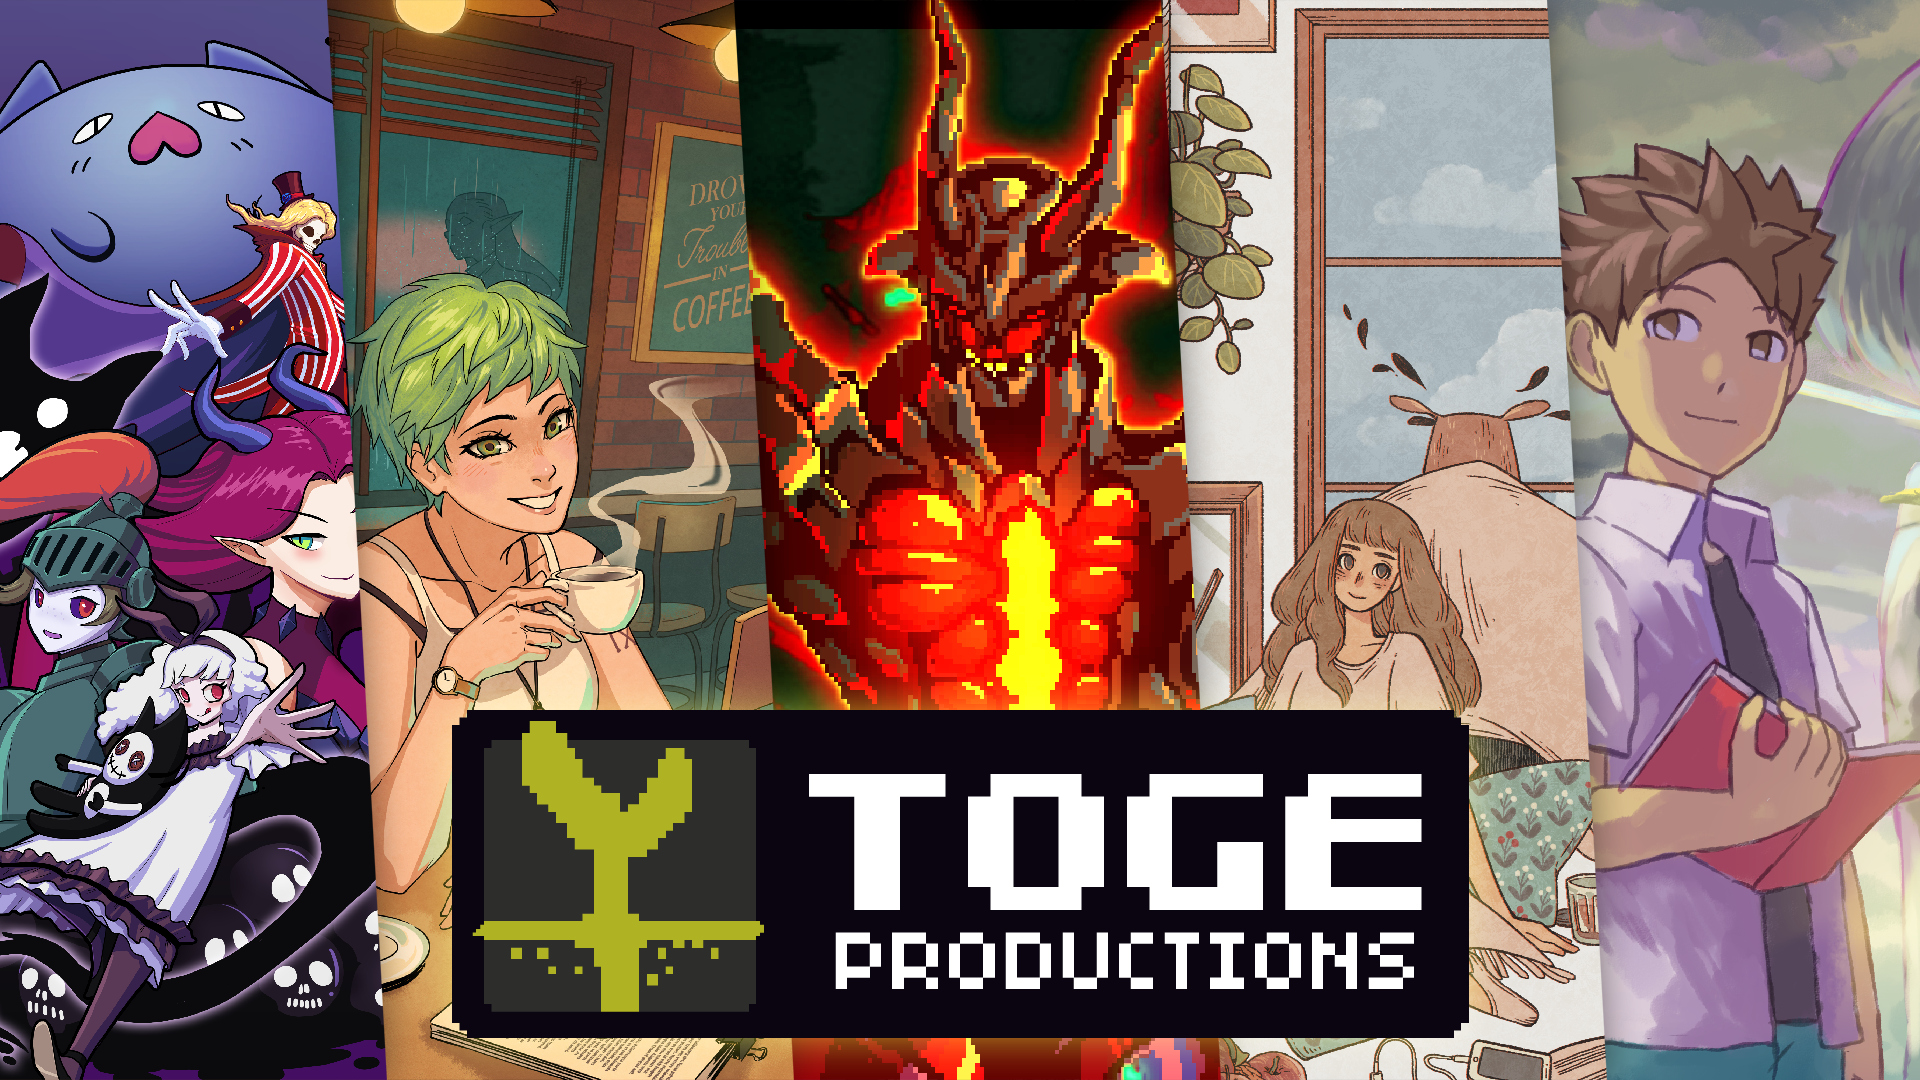 www.togeproductions.com